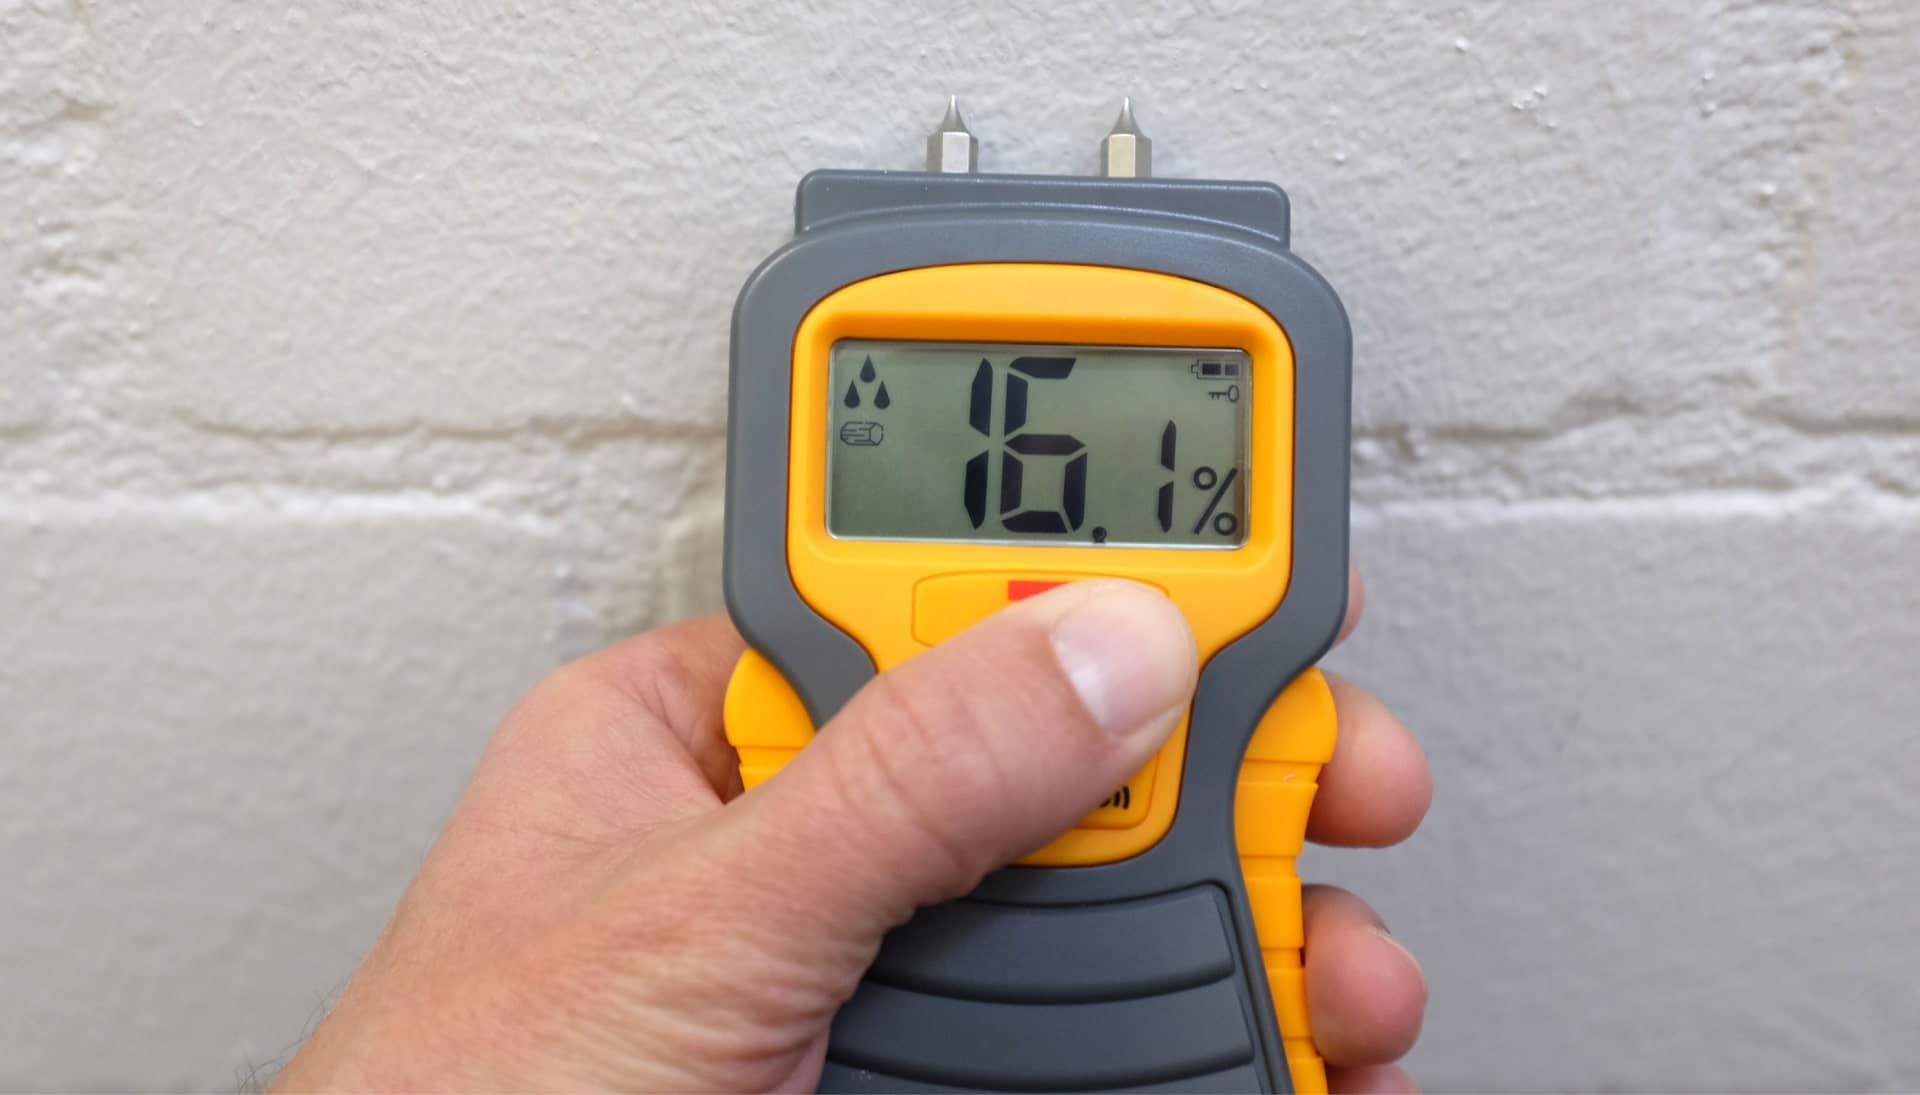 We provide fast, accurate, and affordable mold testing services in Baltimore, Maryland.